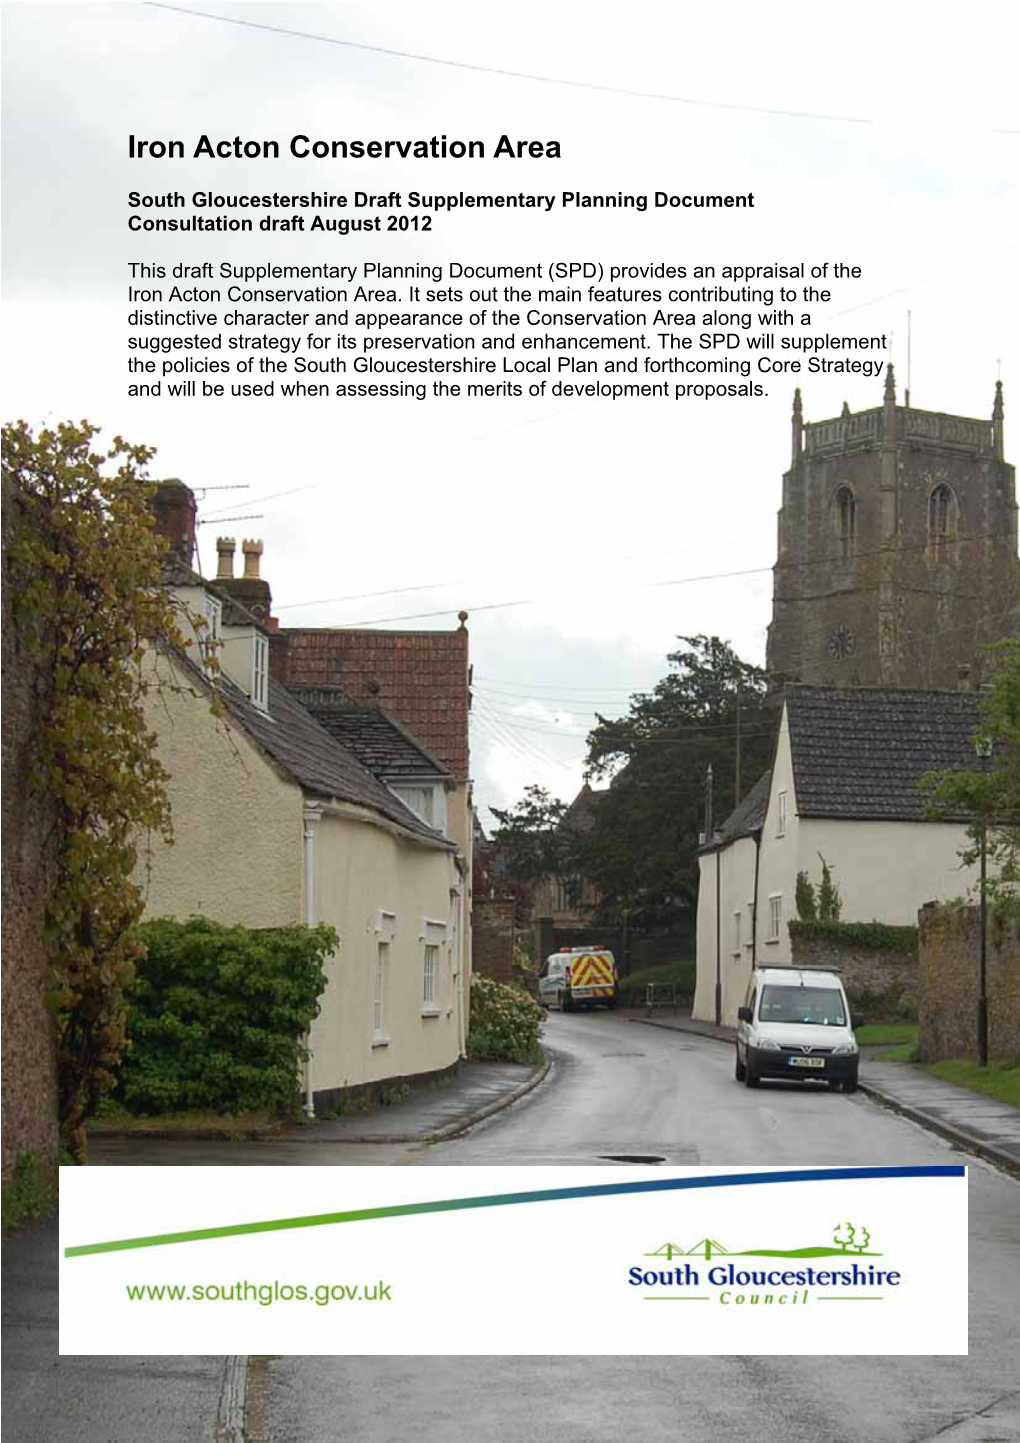 Iron Acton Conservation Area Supplementary Planning Document